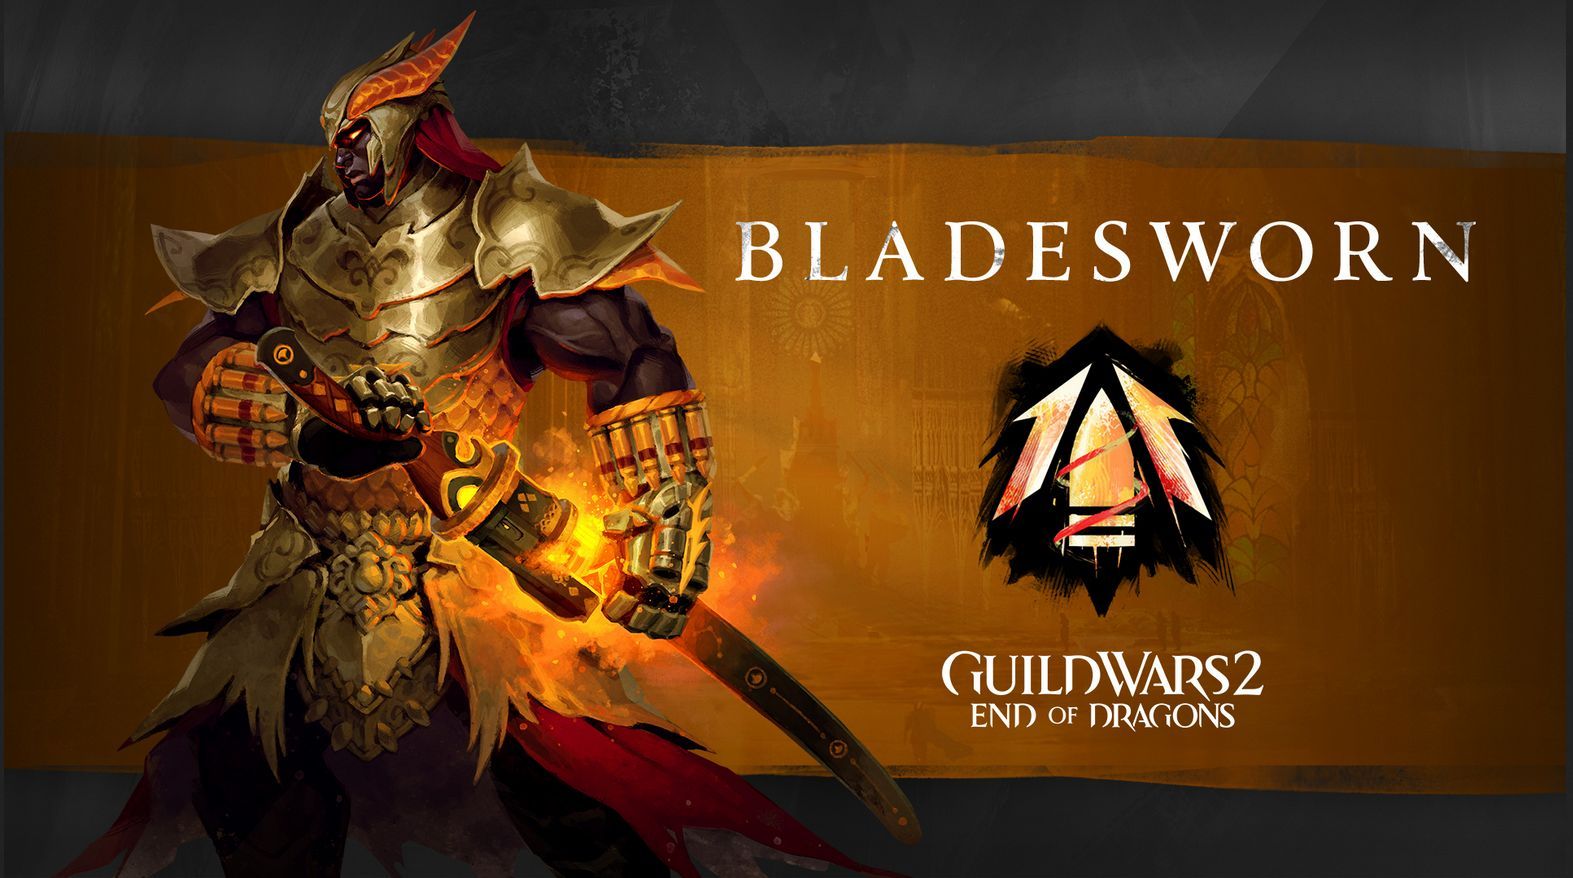 Arena Nets official art for the reveal of the Bladwsworn class, features a norn in intricate armour drawing a glowing greatsword on an orange background.